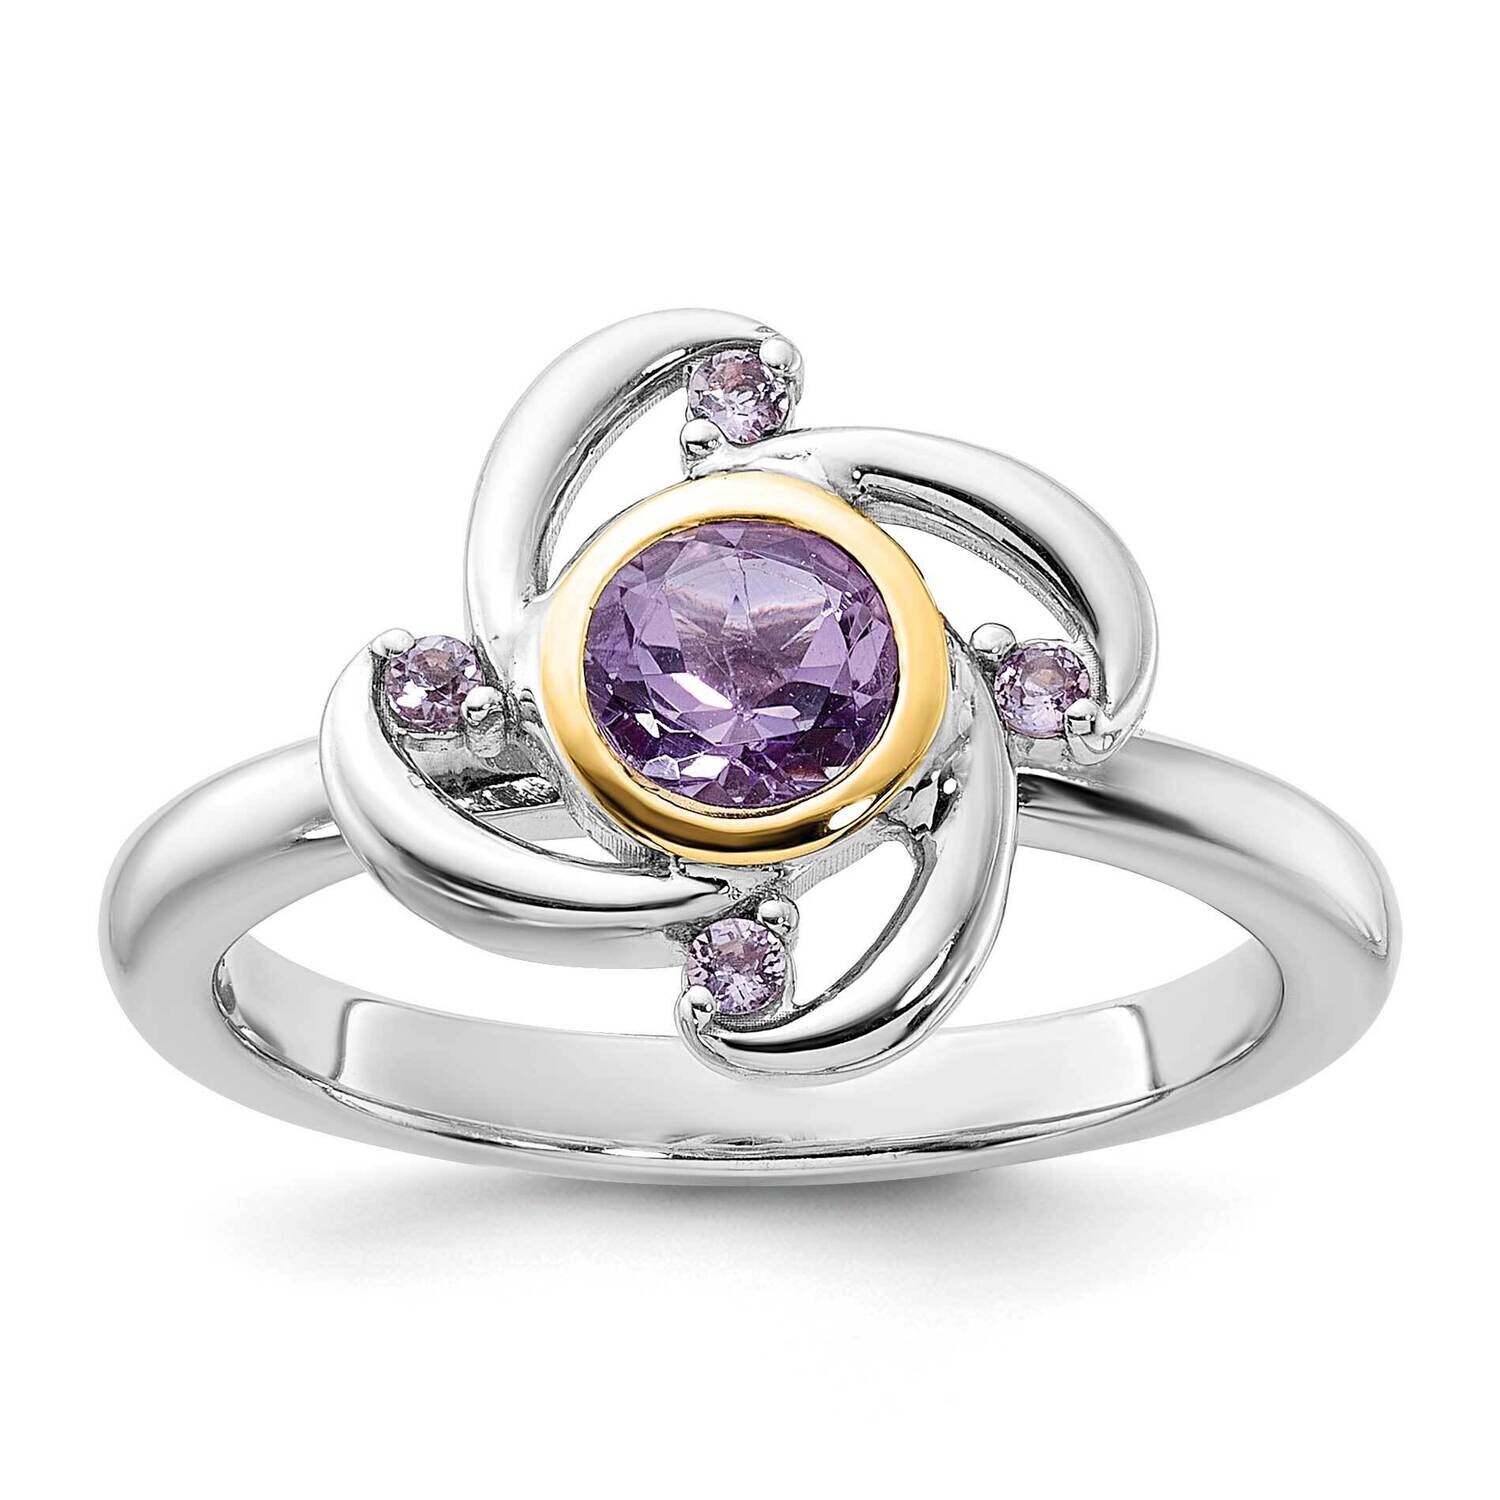 Shey Couture 14K Accent Amethyst Pink Quartz Ring Sterling Silver Rhodium-Plated QTC1785